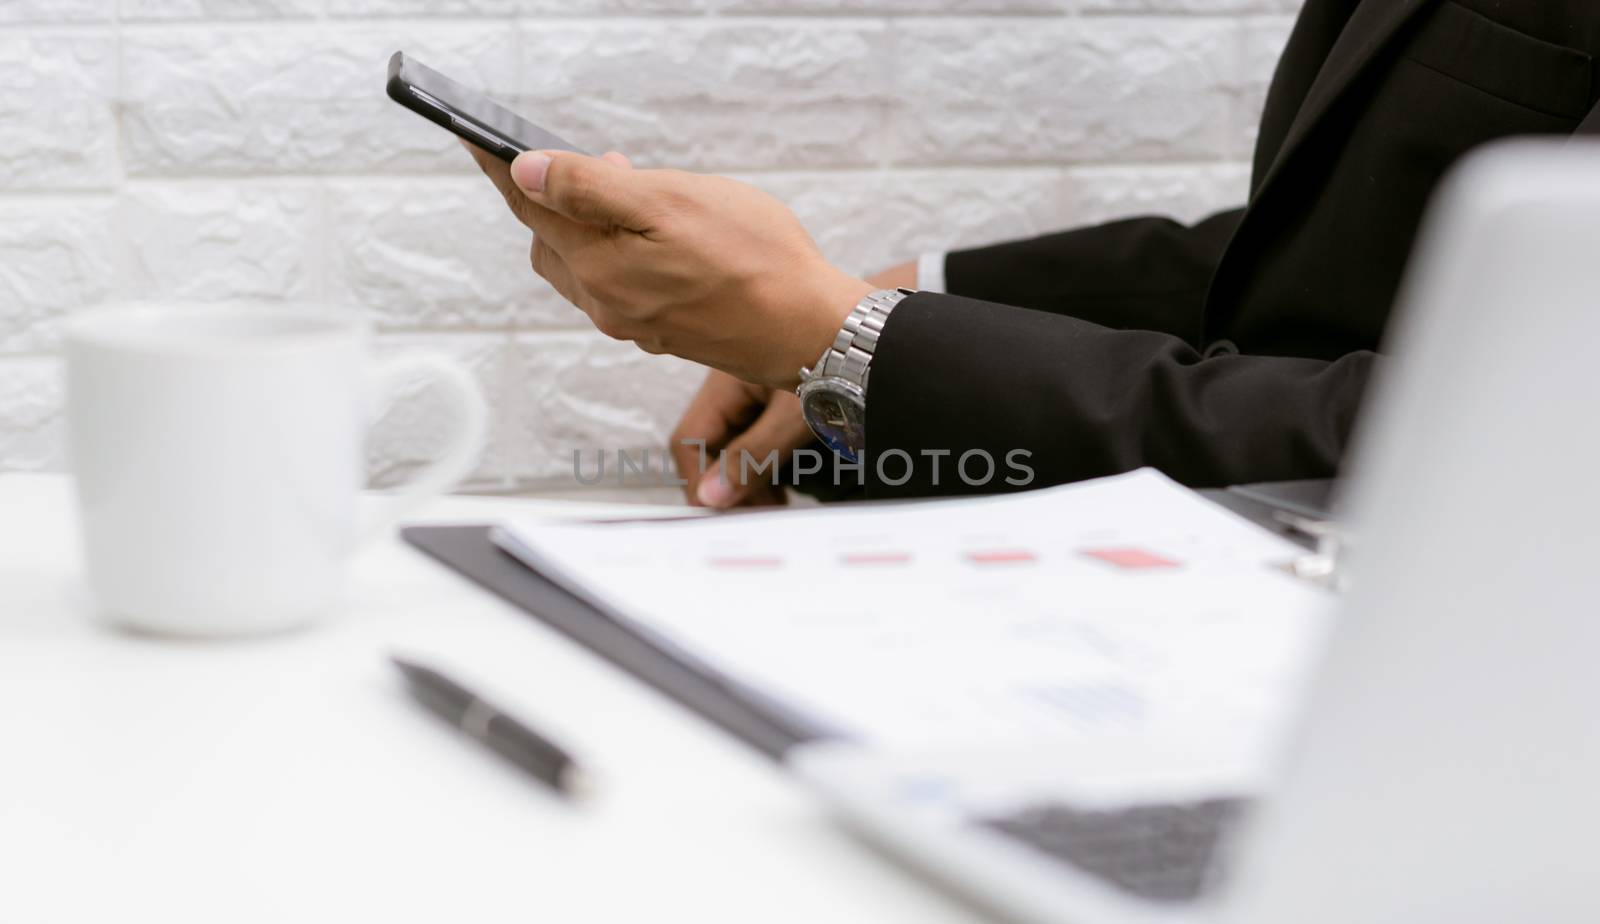 Business men hold smartphones to check information at the office by sompongtom